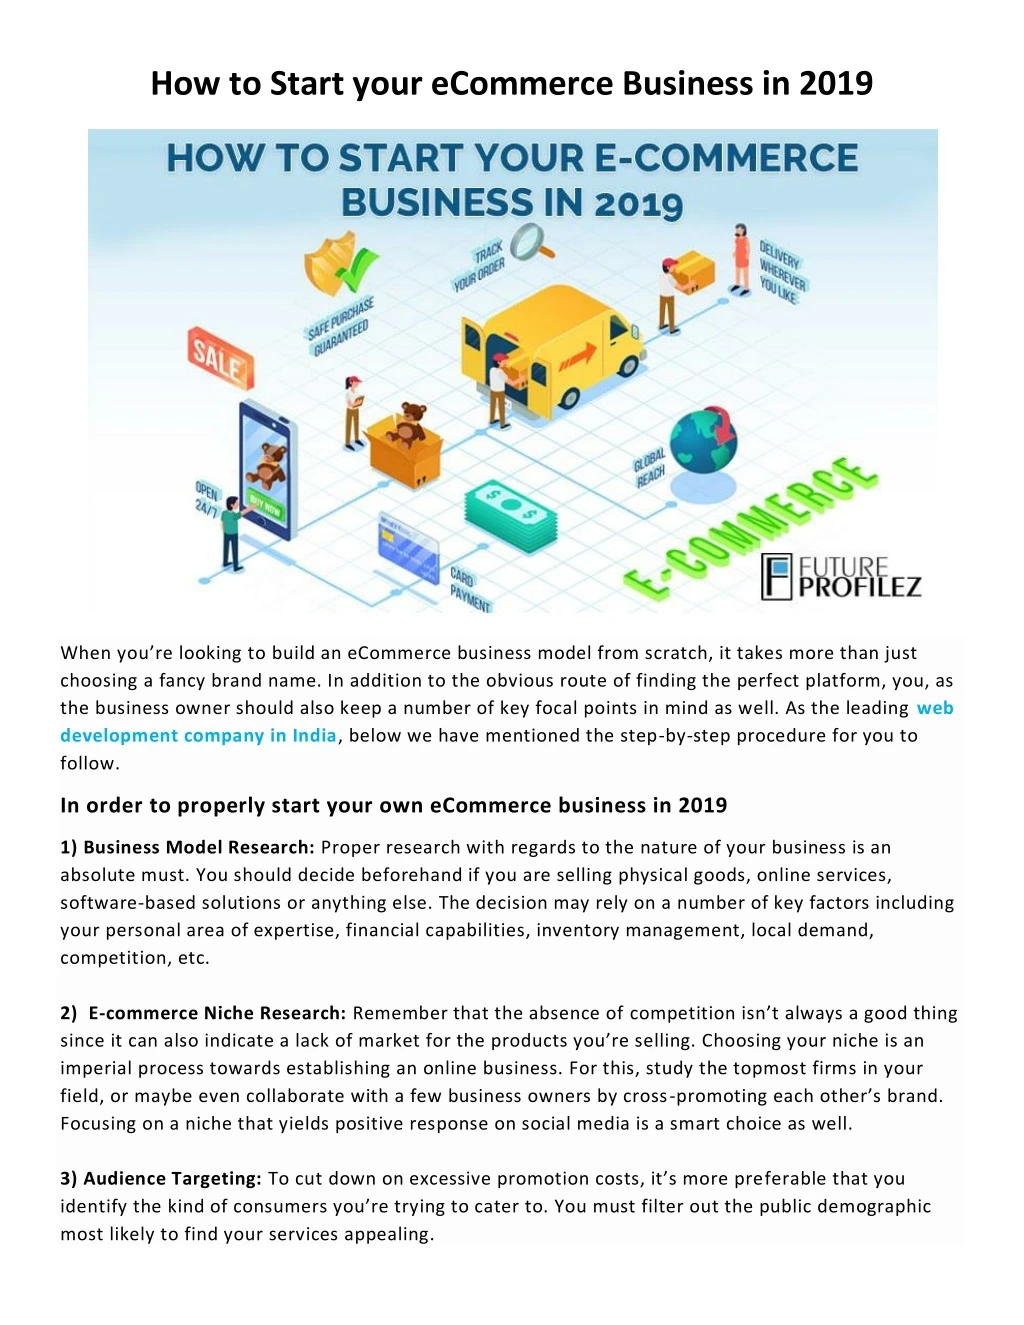 how to start your ecommerce business in 2019